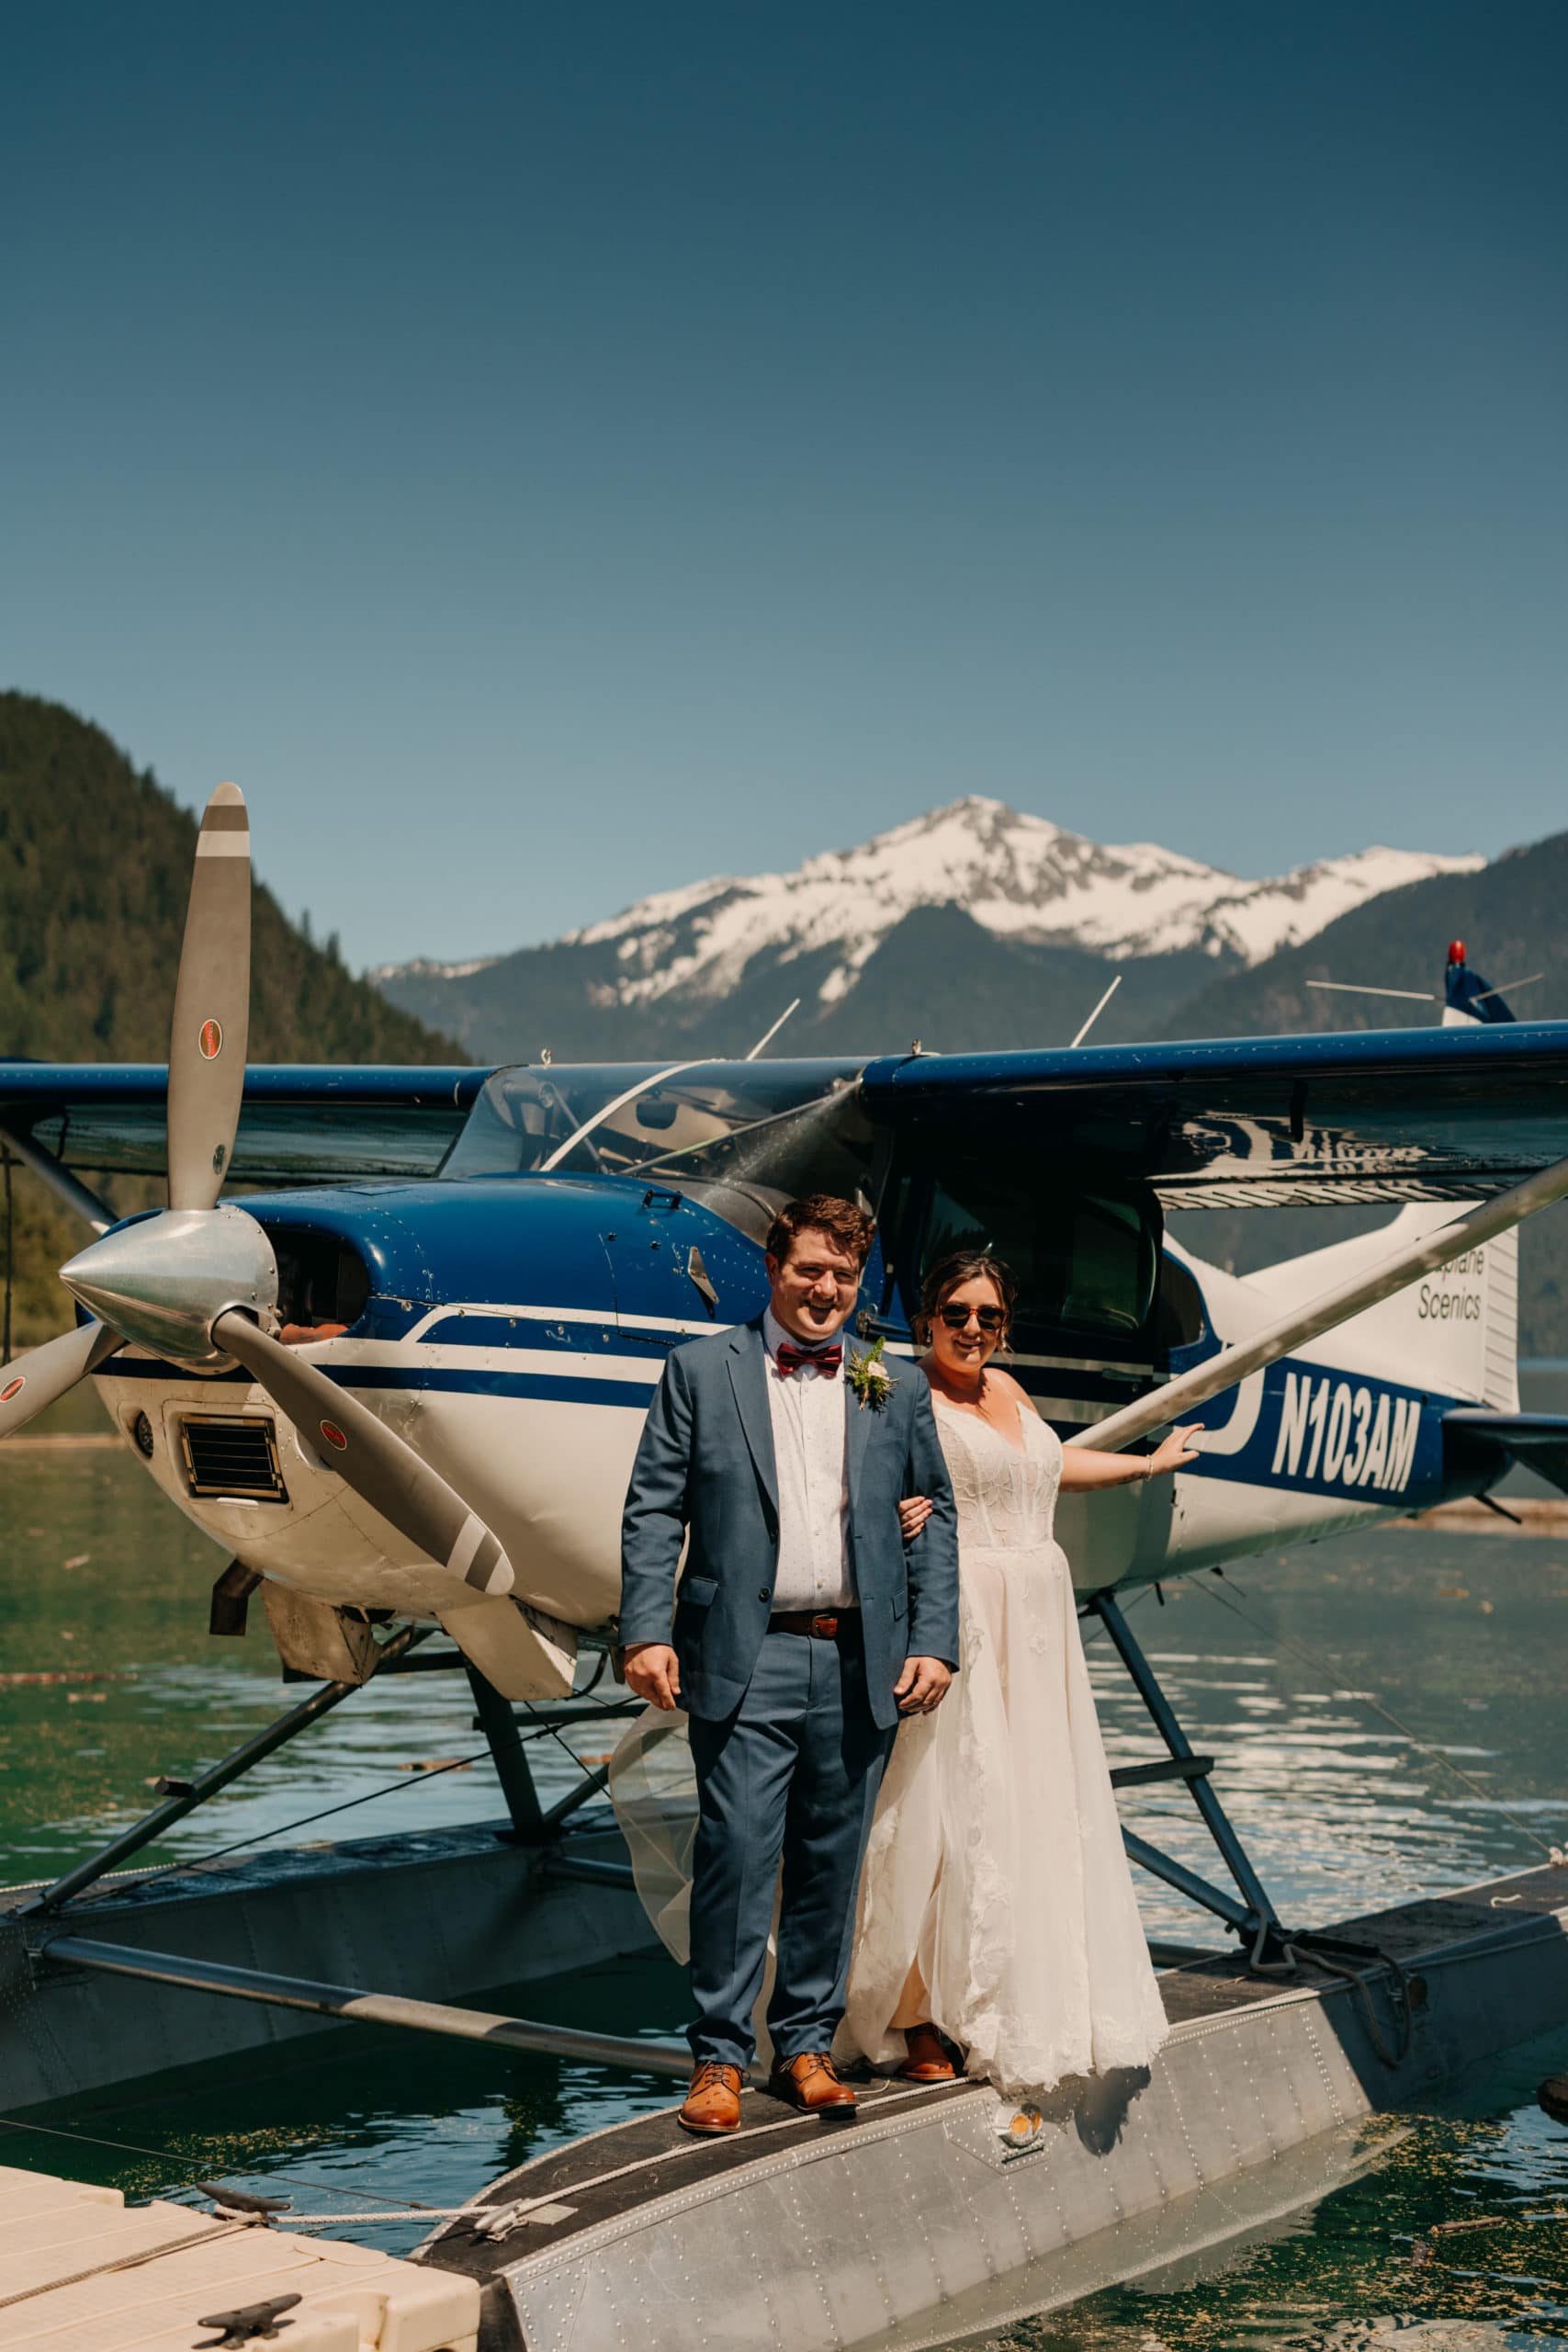 a couple stand in front of a seaplane. he wears a blue suit; she wears a white dress and sunglasses. a snowy mountain is in the background.